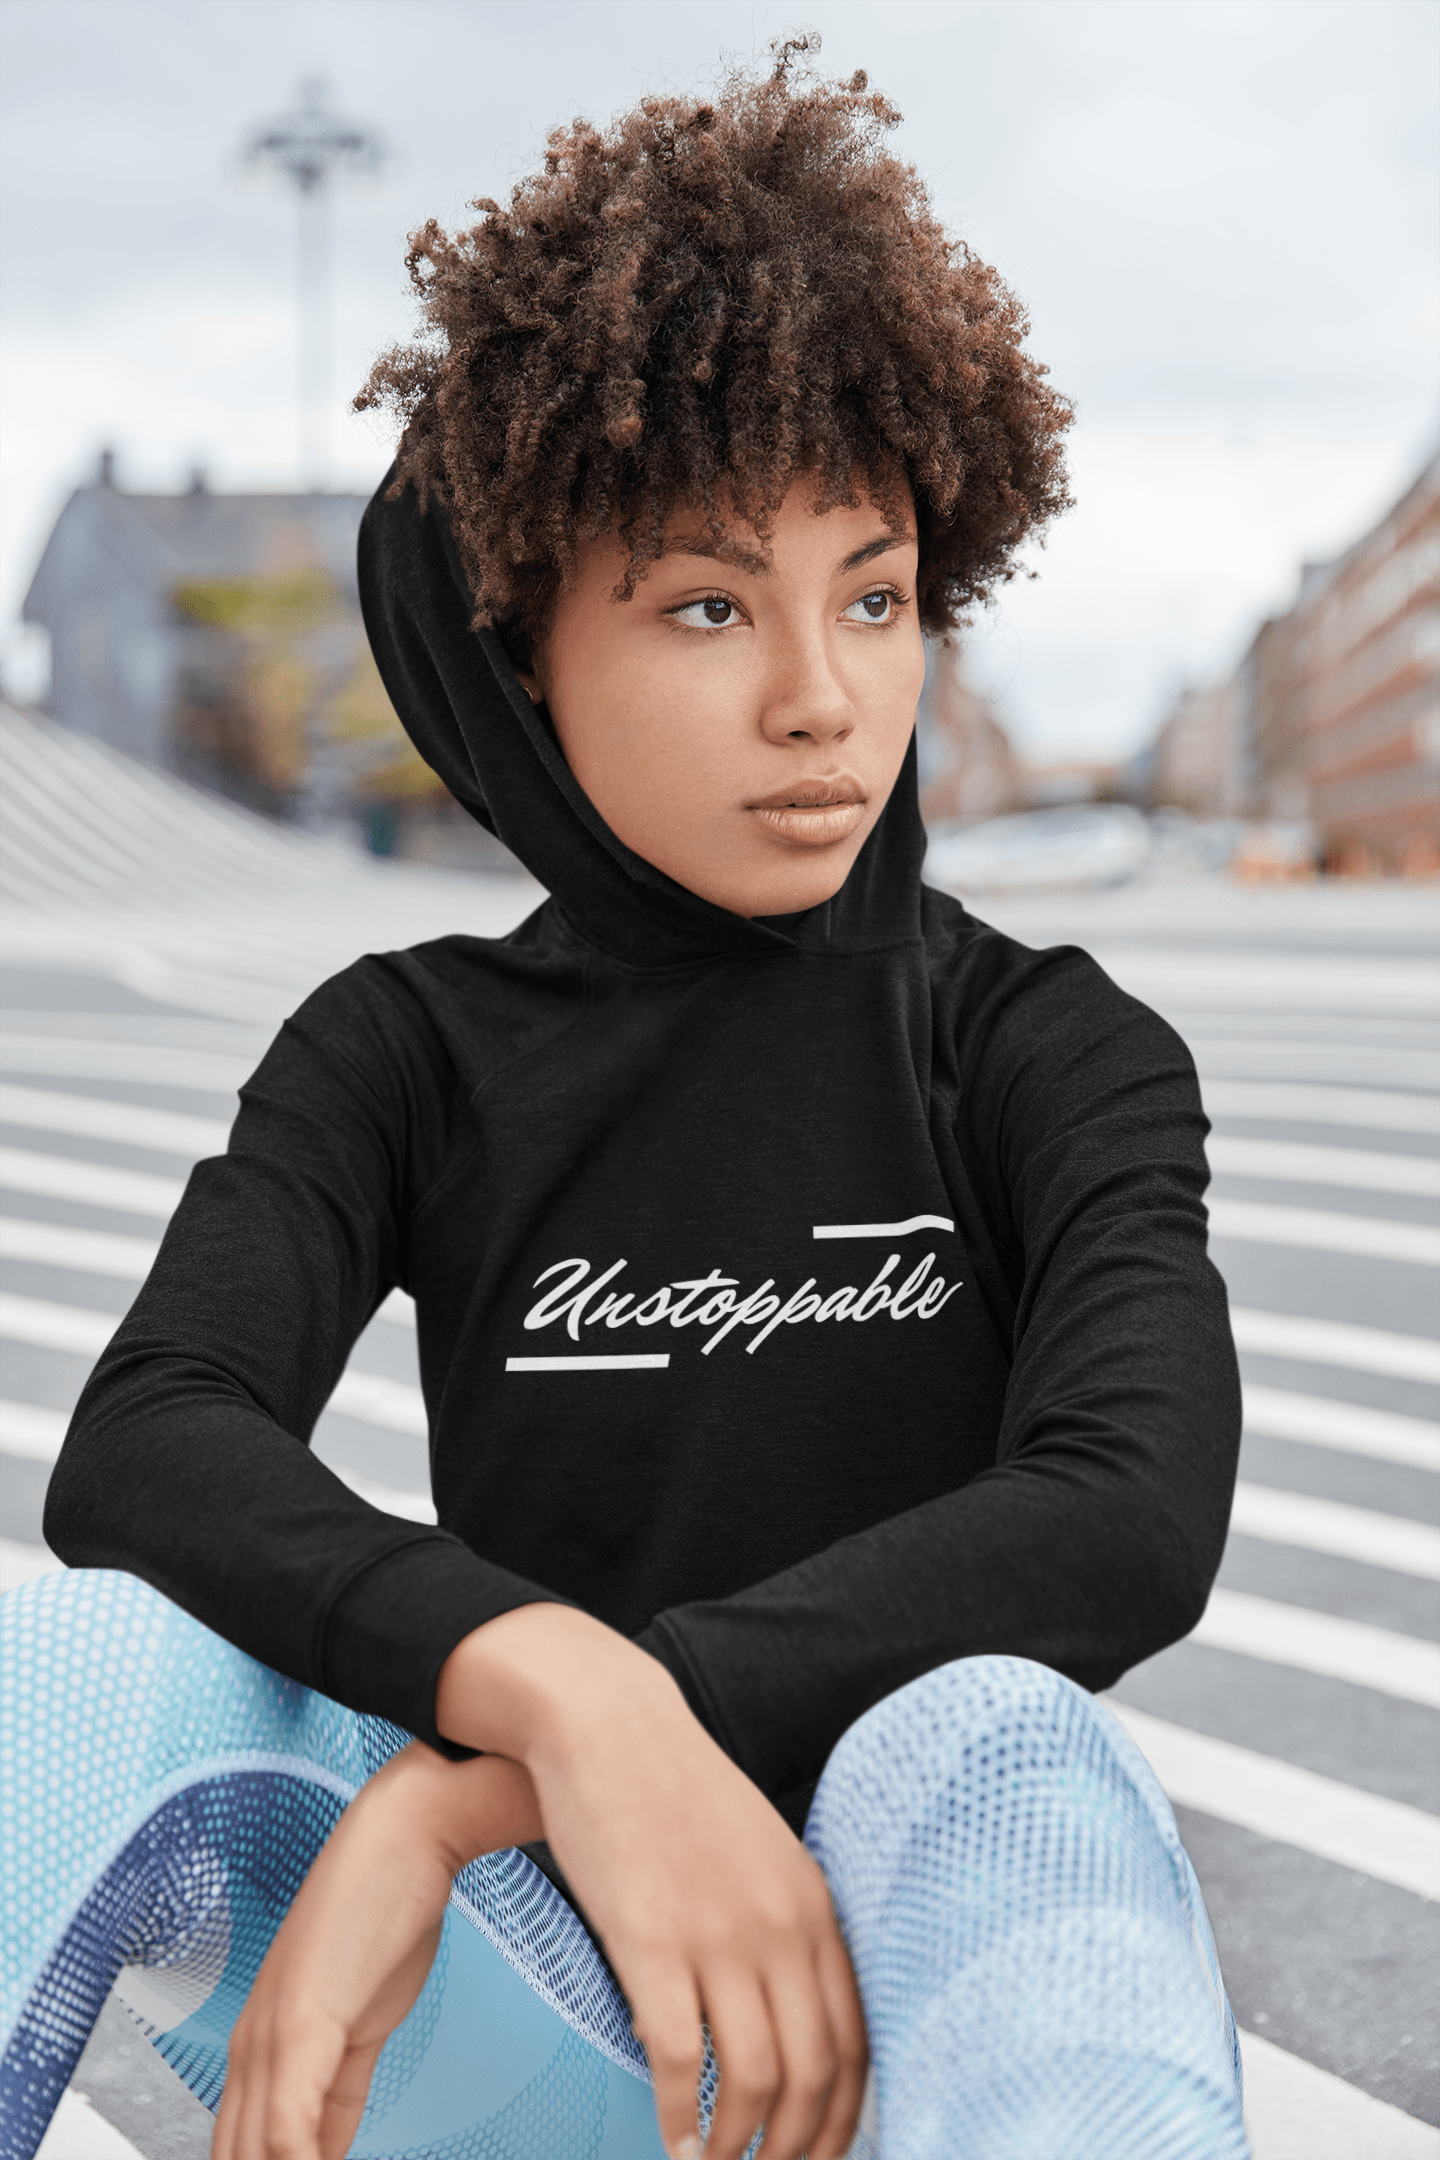 Unstoppable Hoodie - Women Empowerment T-Shirts & Apparel | CP Designs Unlimited